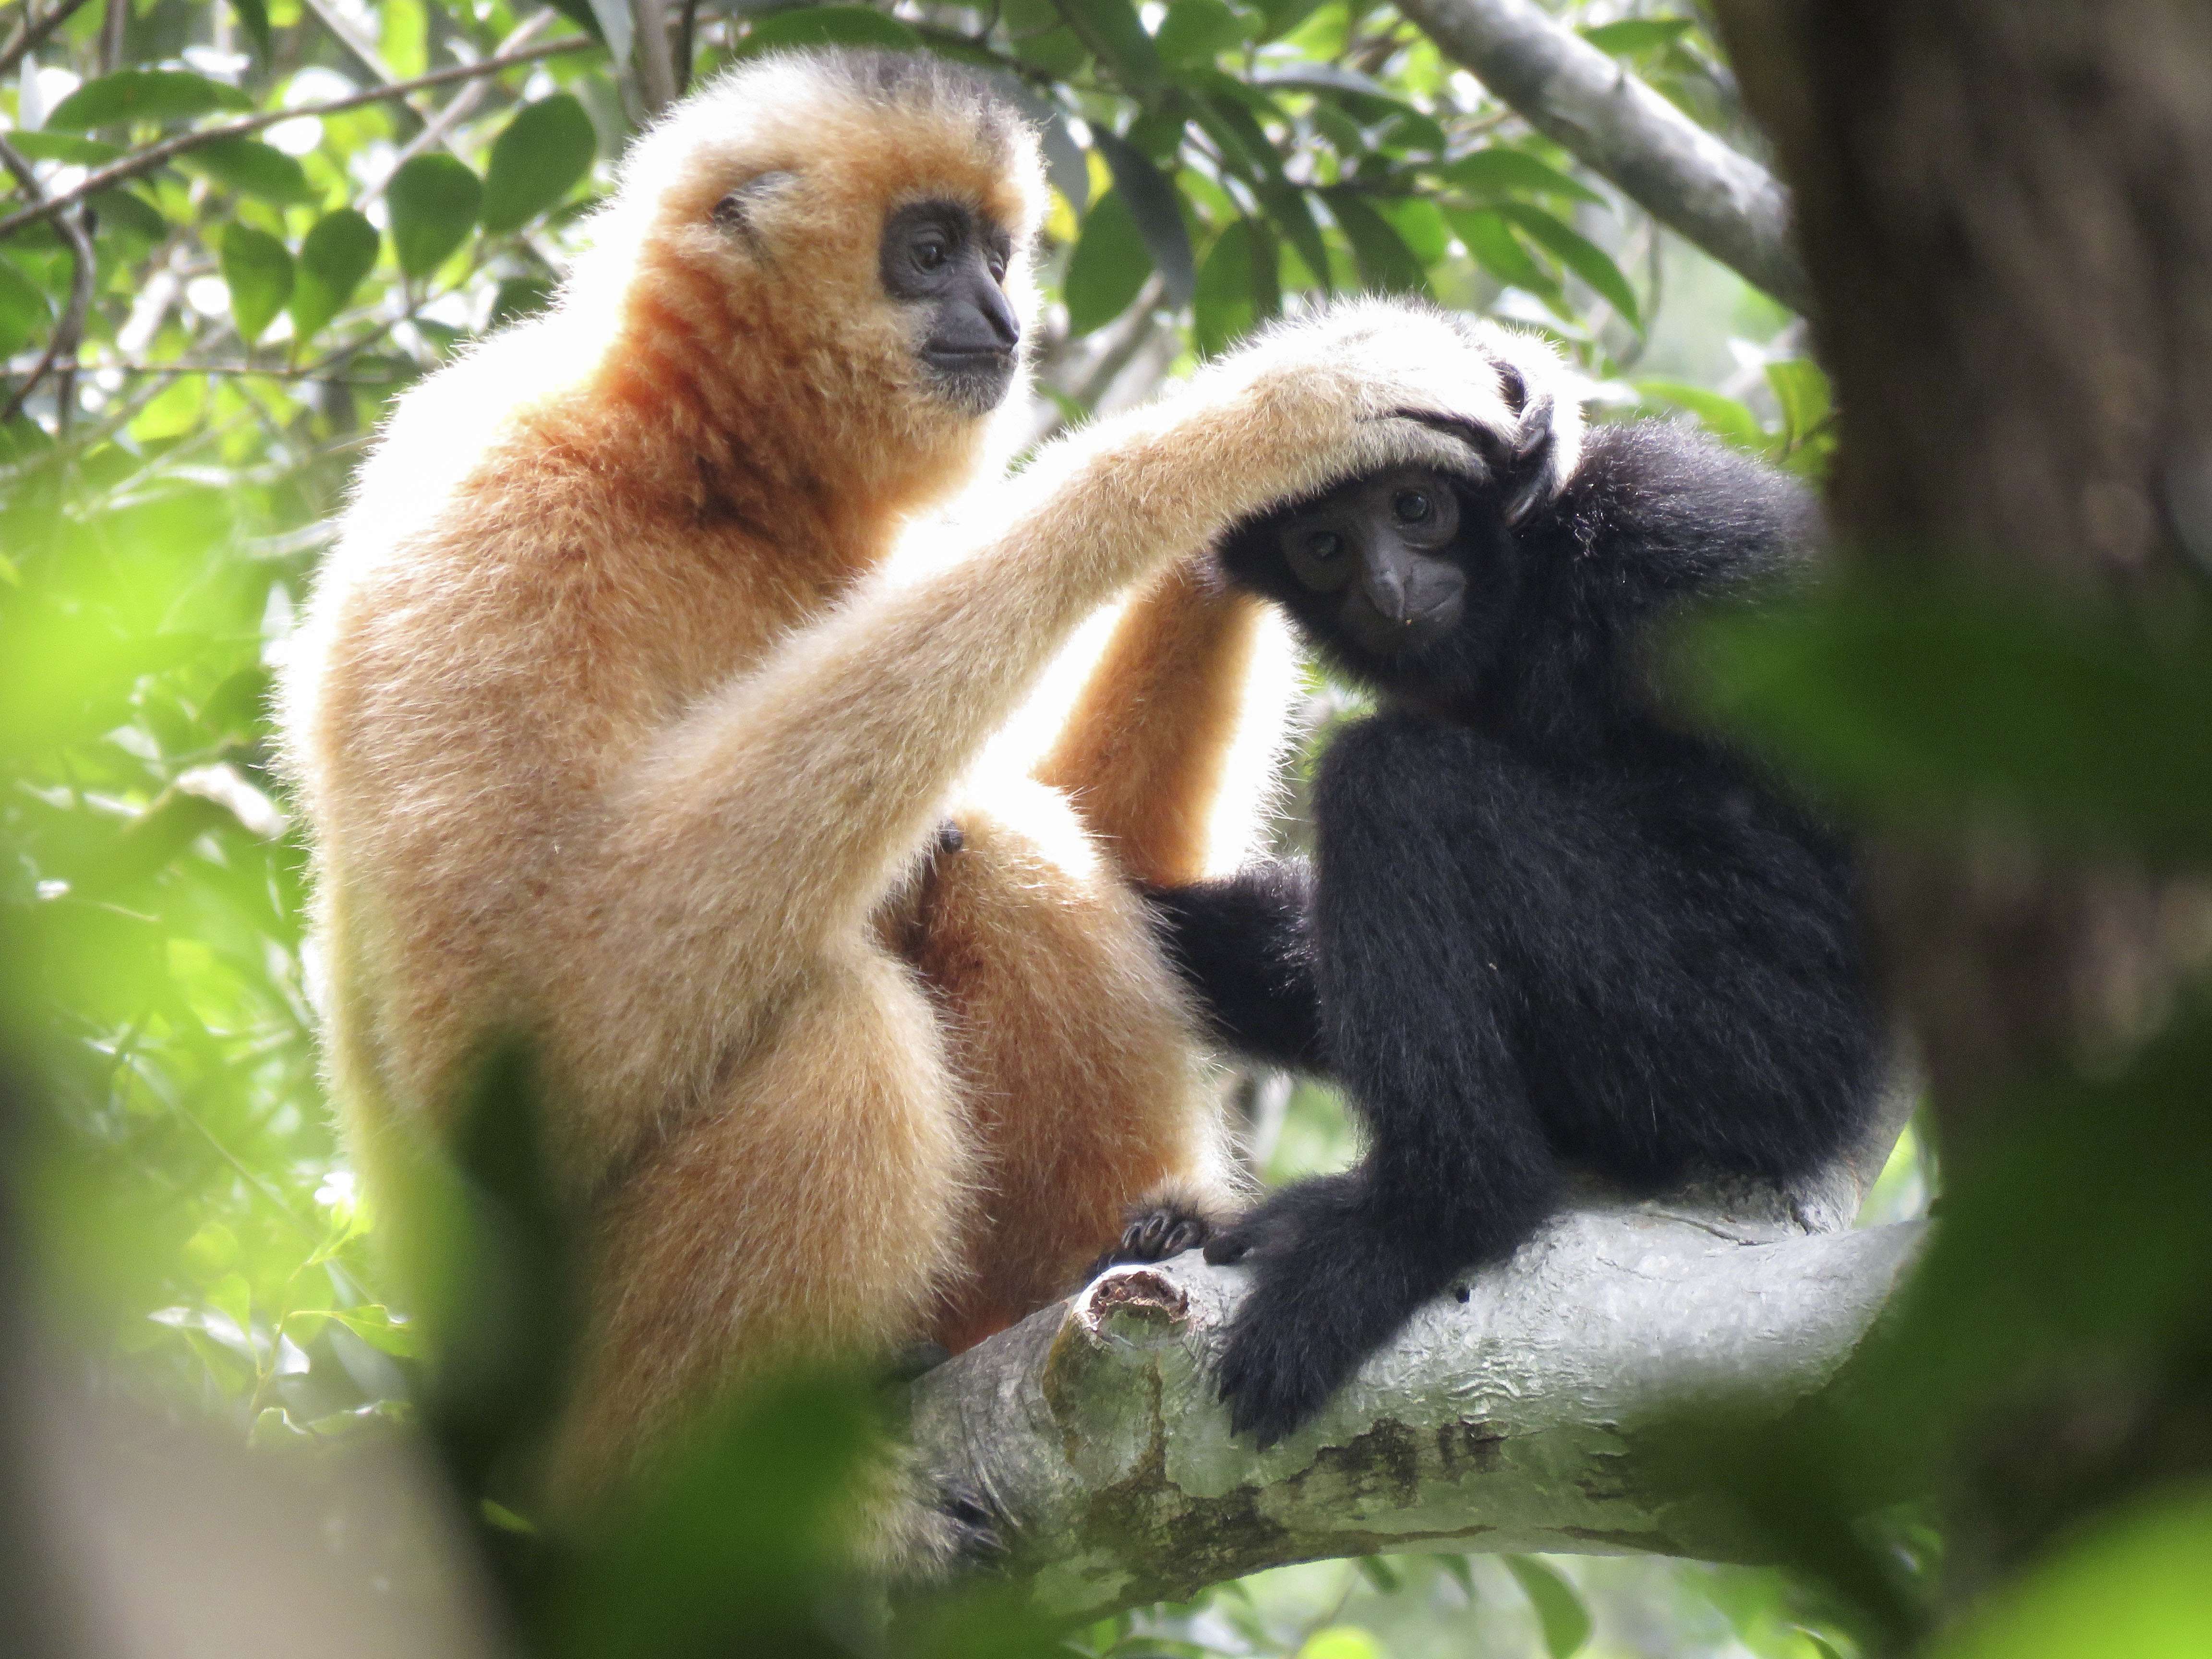 Gibbons at the Bawangling National Nature Reserve, in Hainan, in September last year. Photos: Kadoorie Farm and Botanic Garden and Bawangling National Nature Reserve